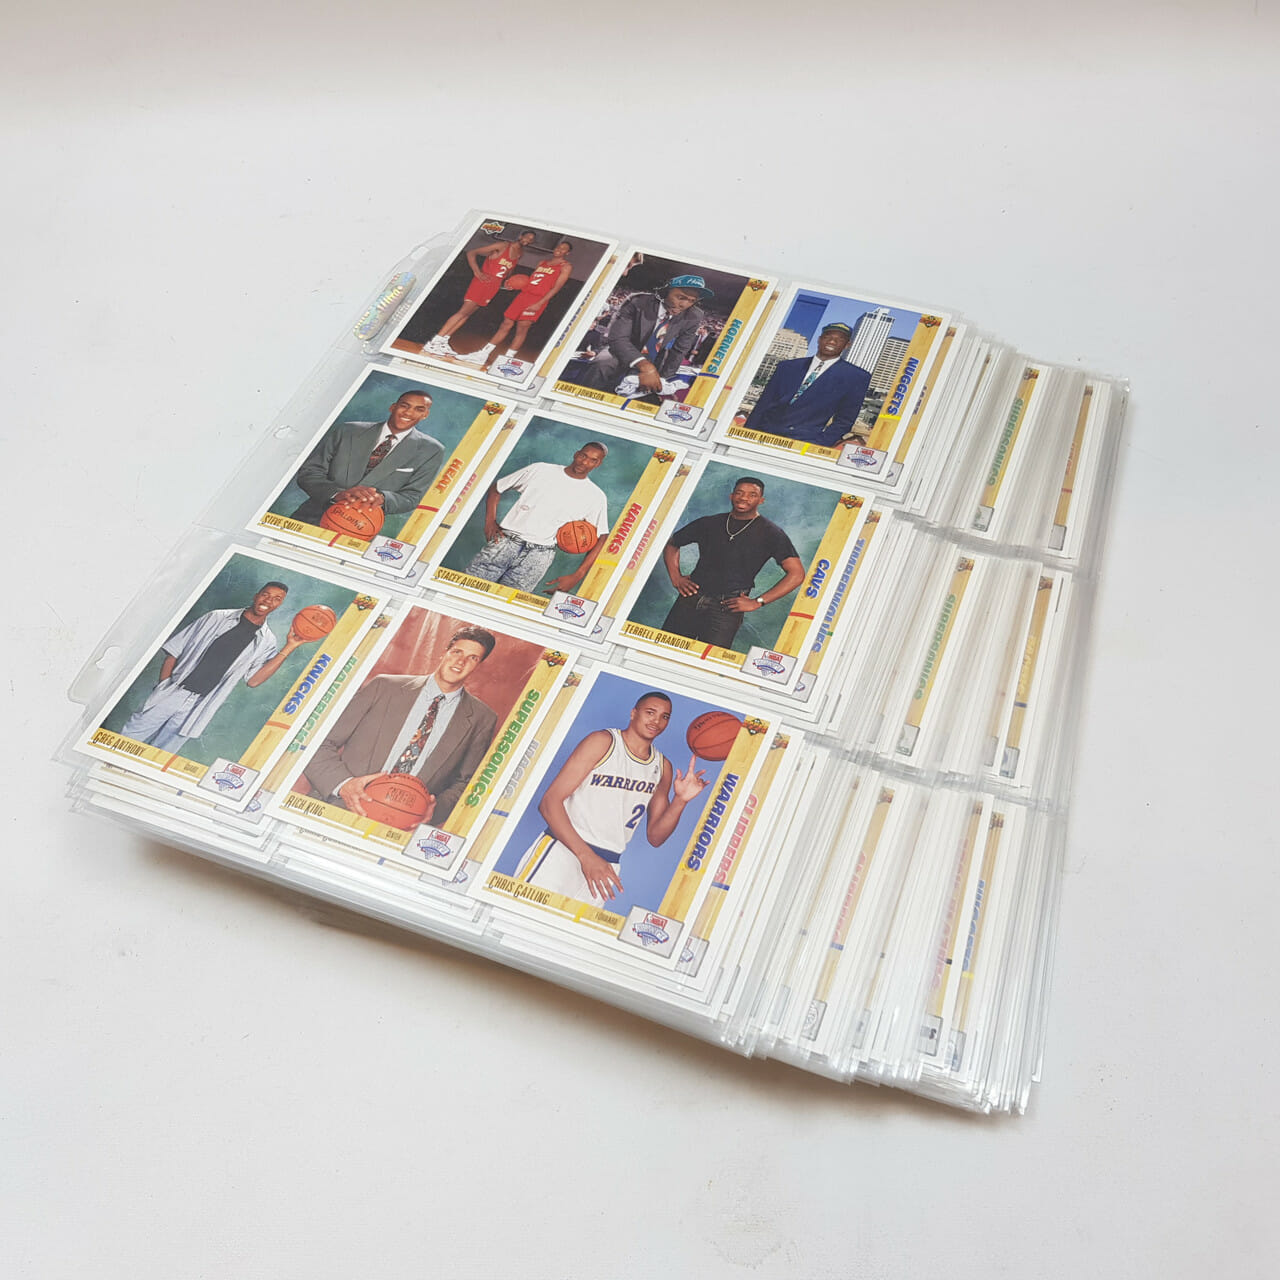 1991-1992 NBA SET OF 441 CARDS UPPER DECK COLLECTABLE CARDS #53421